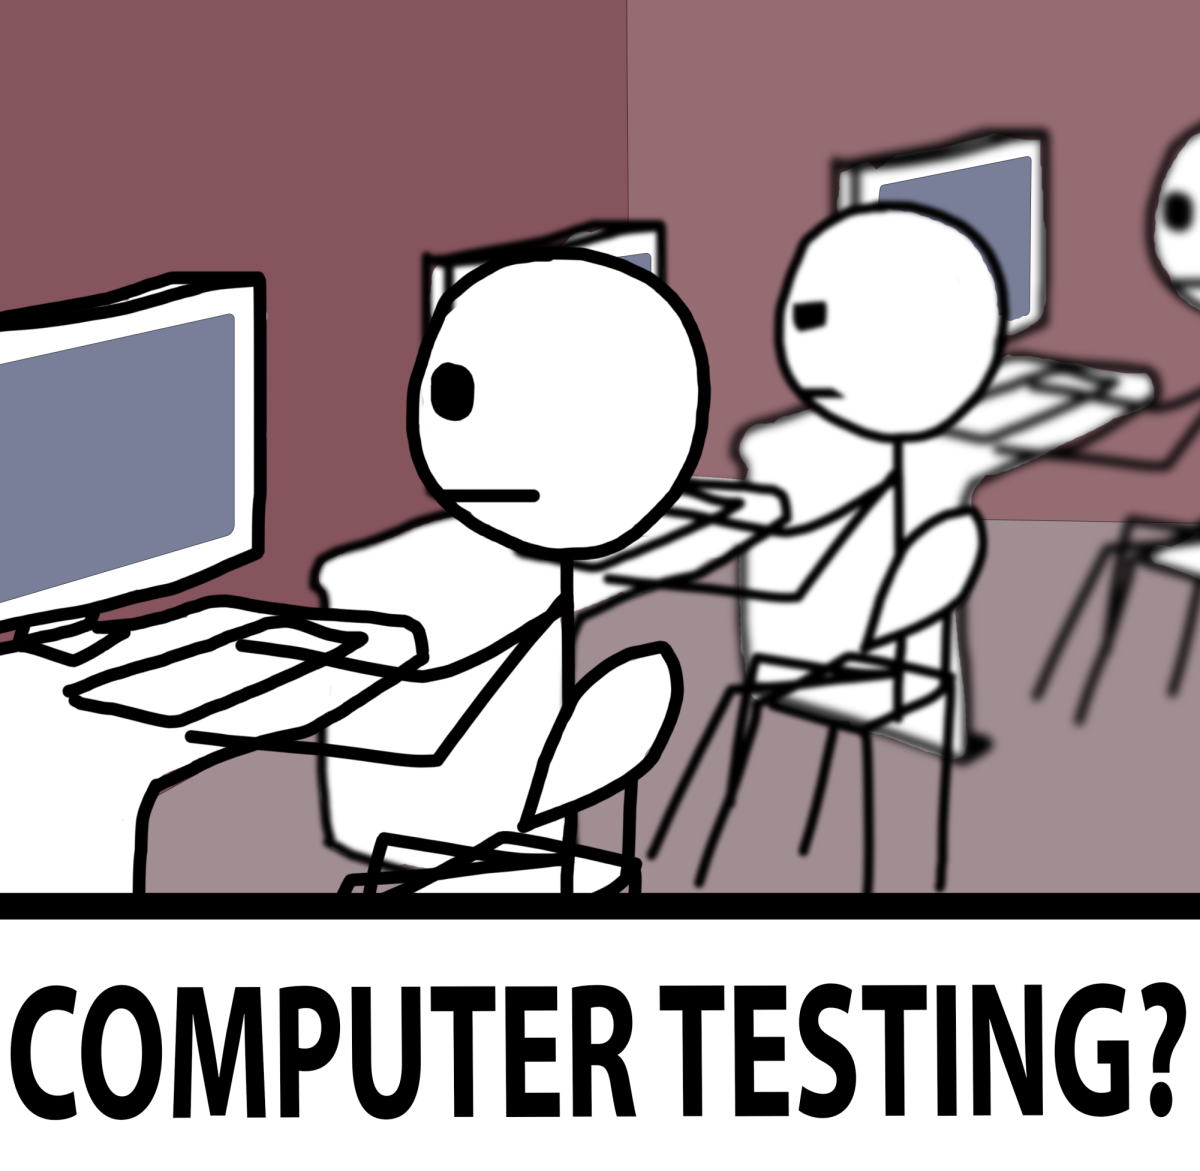 Online testing is the worst